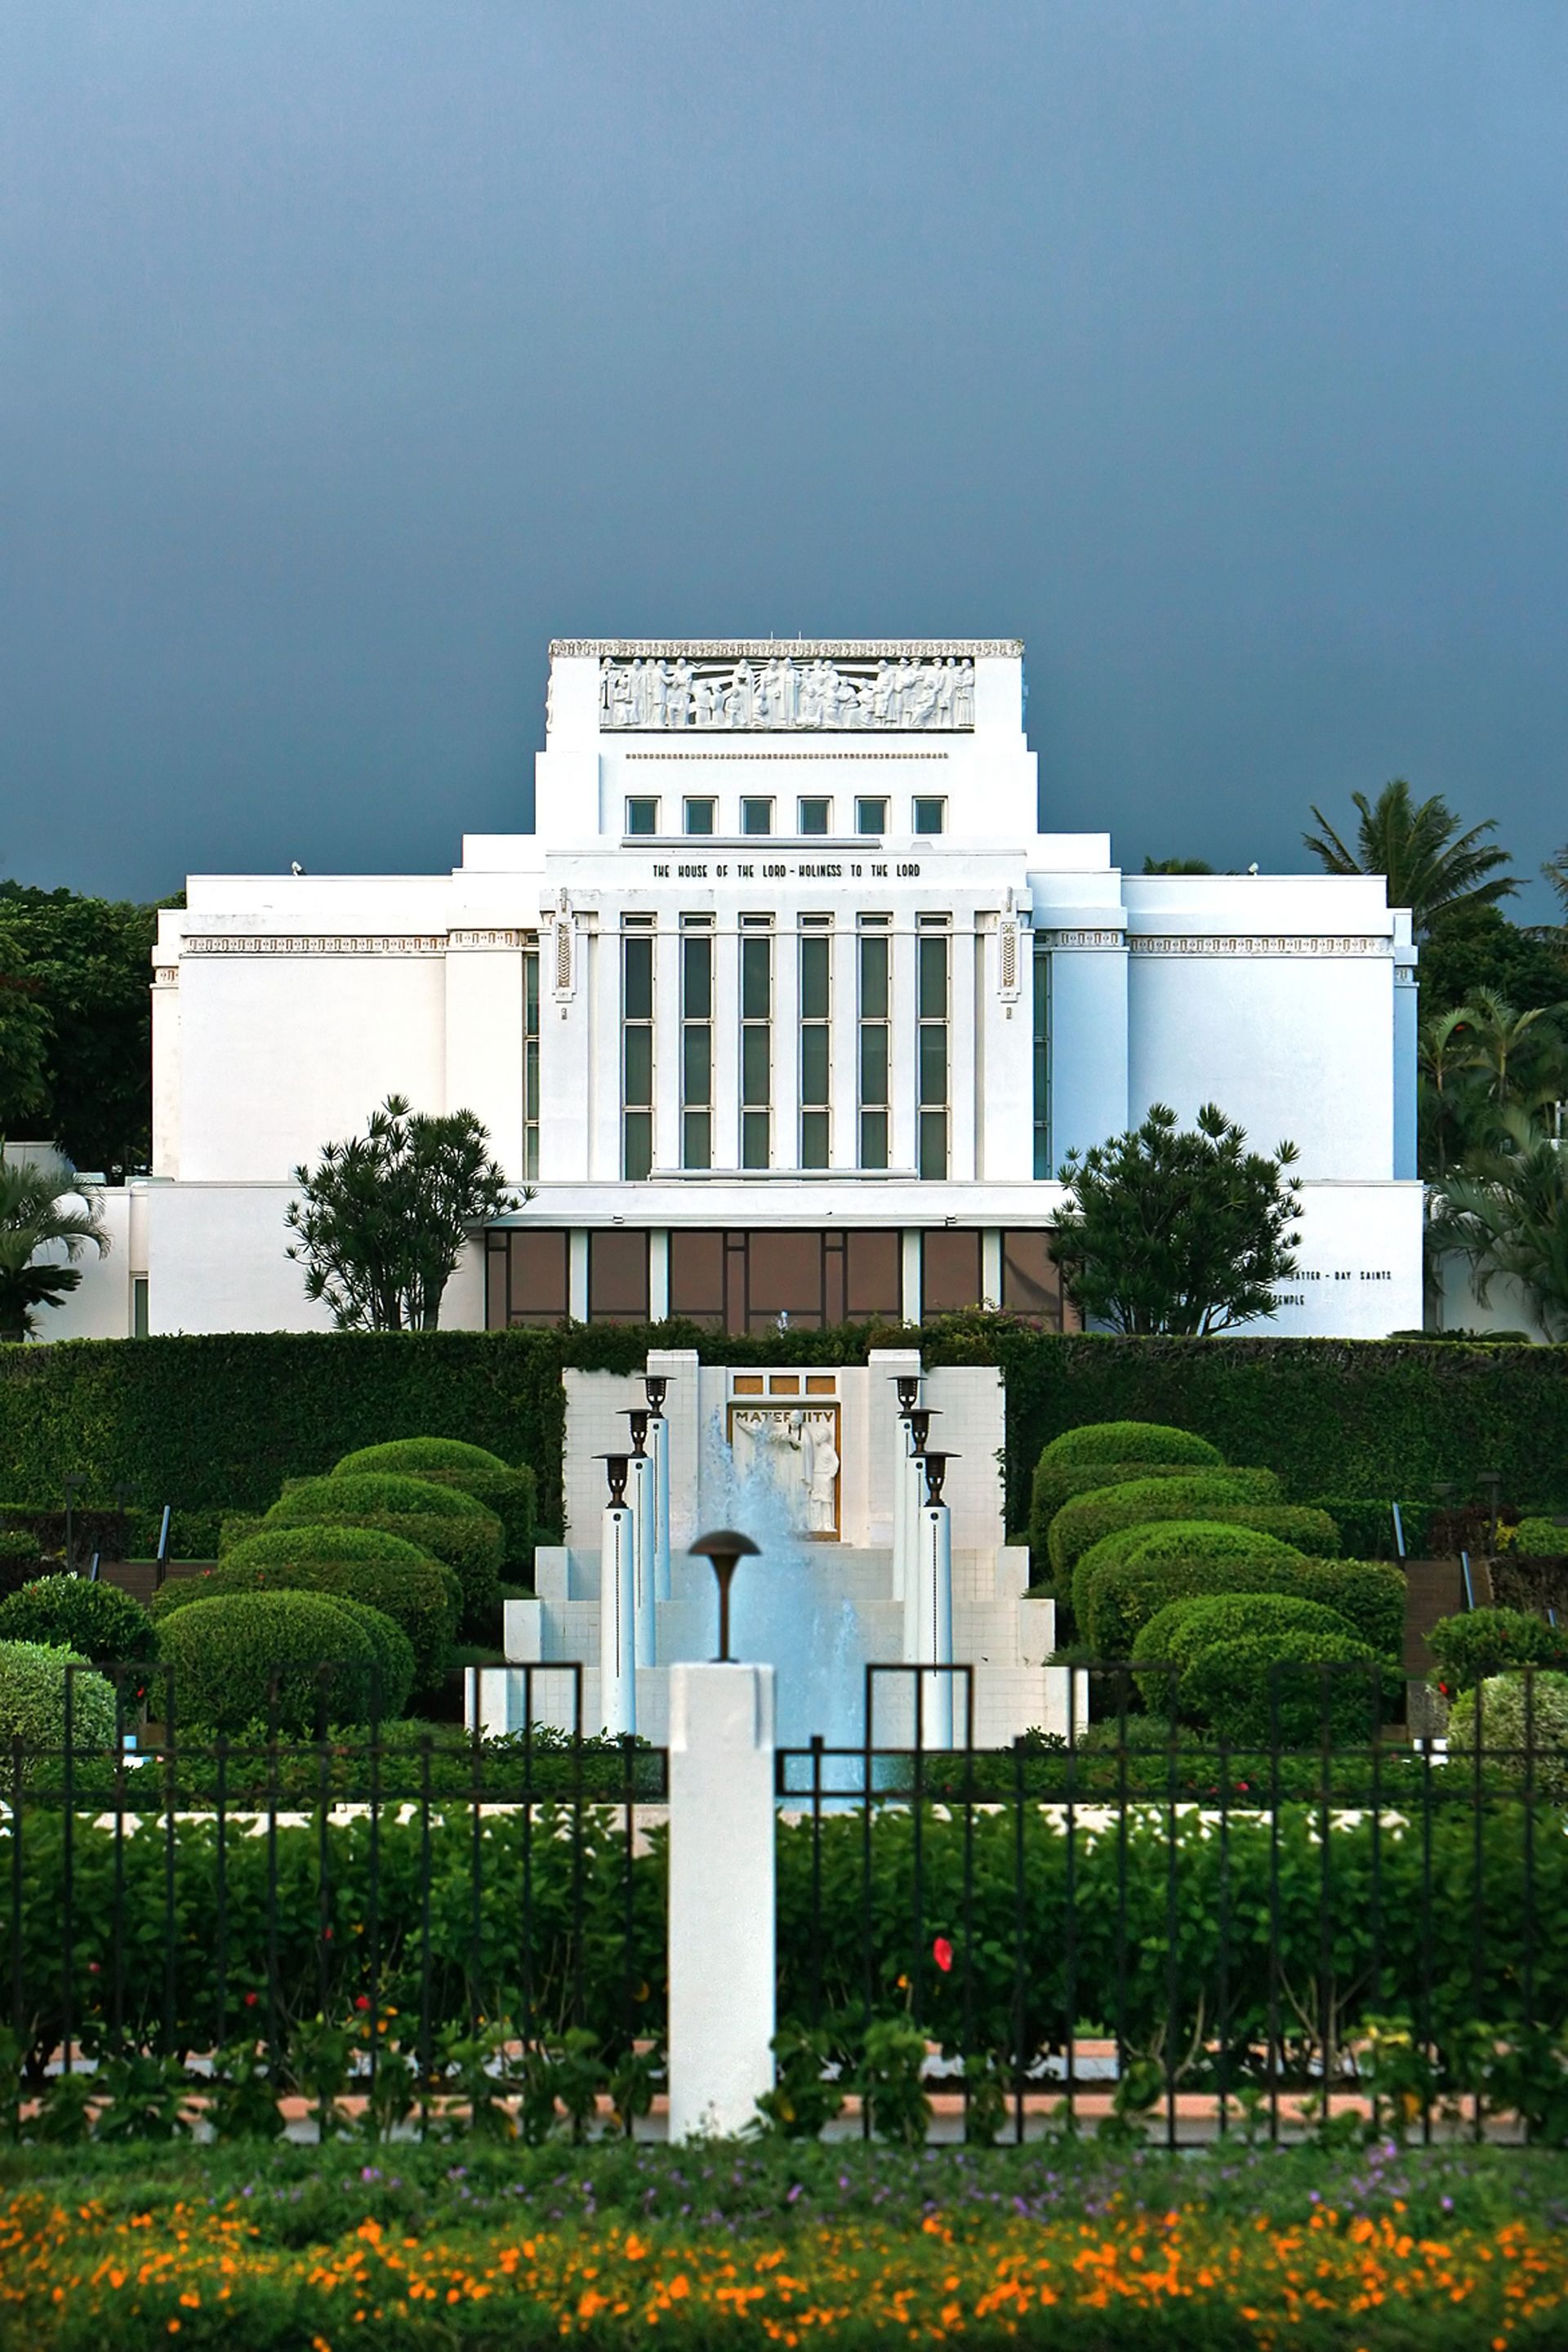 The Laie Hawaii Temple, including the entrance and scenery.